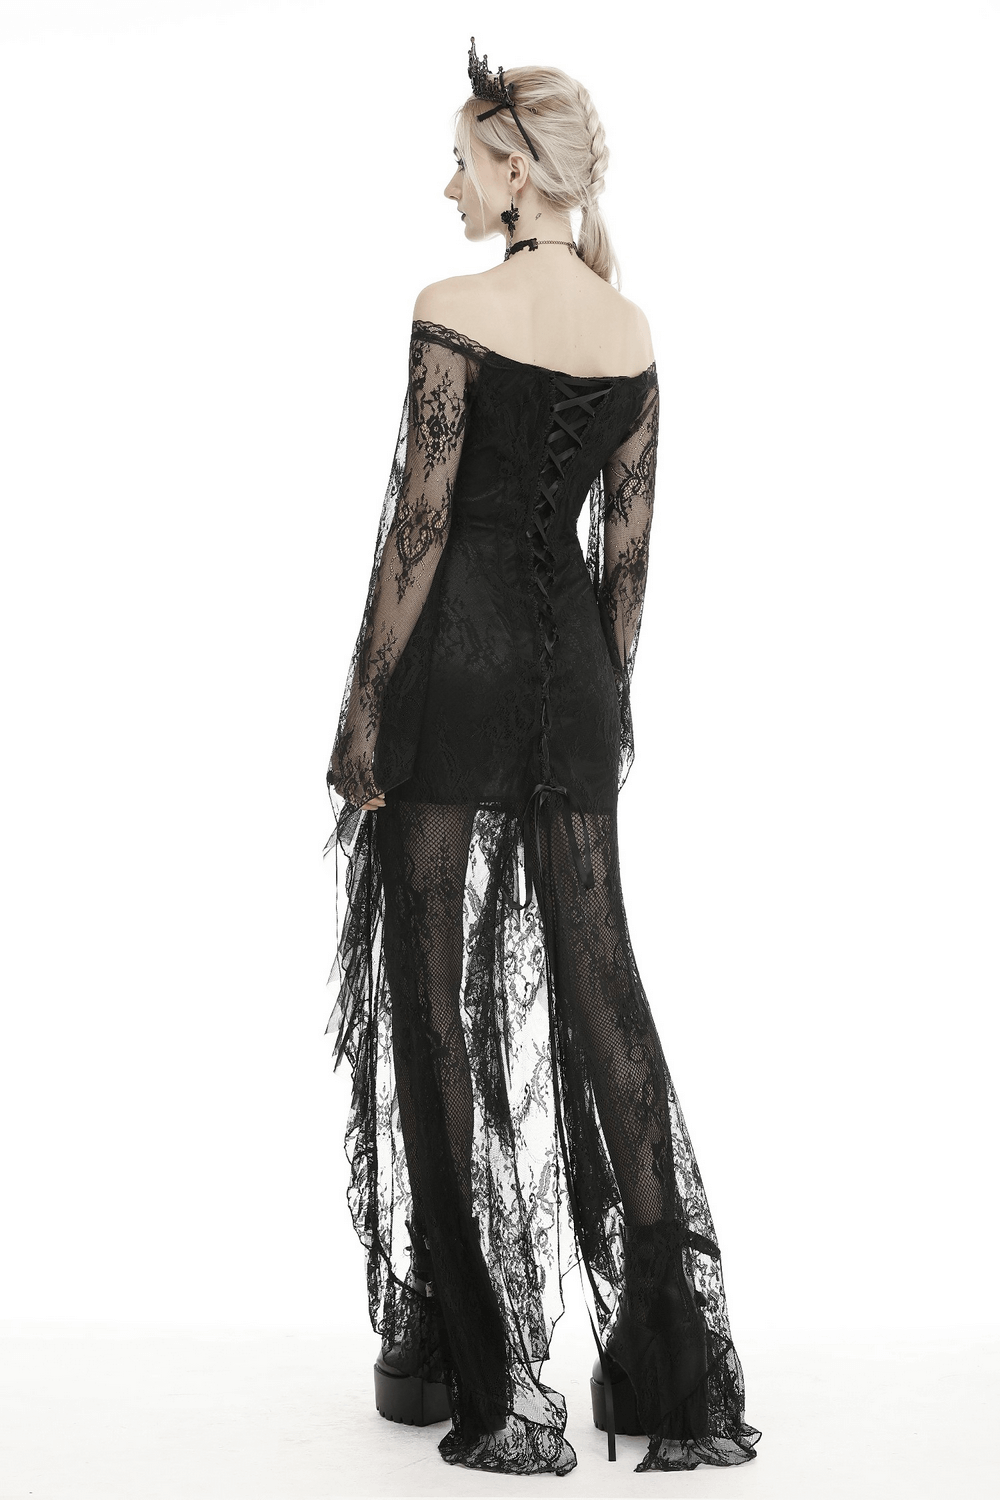 Elegant Black Lace Evening Gown with Gothic Flair